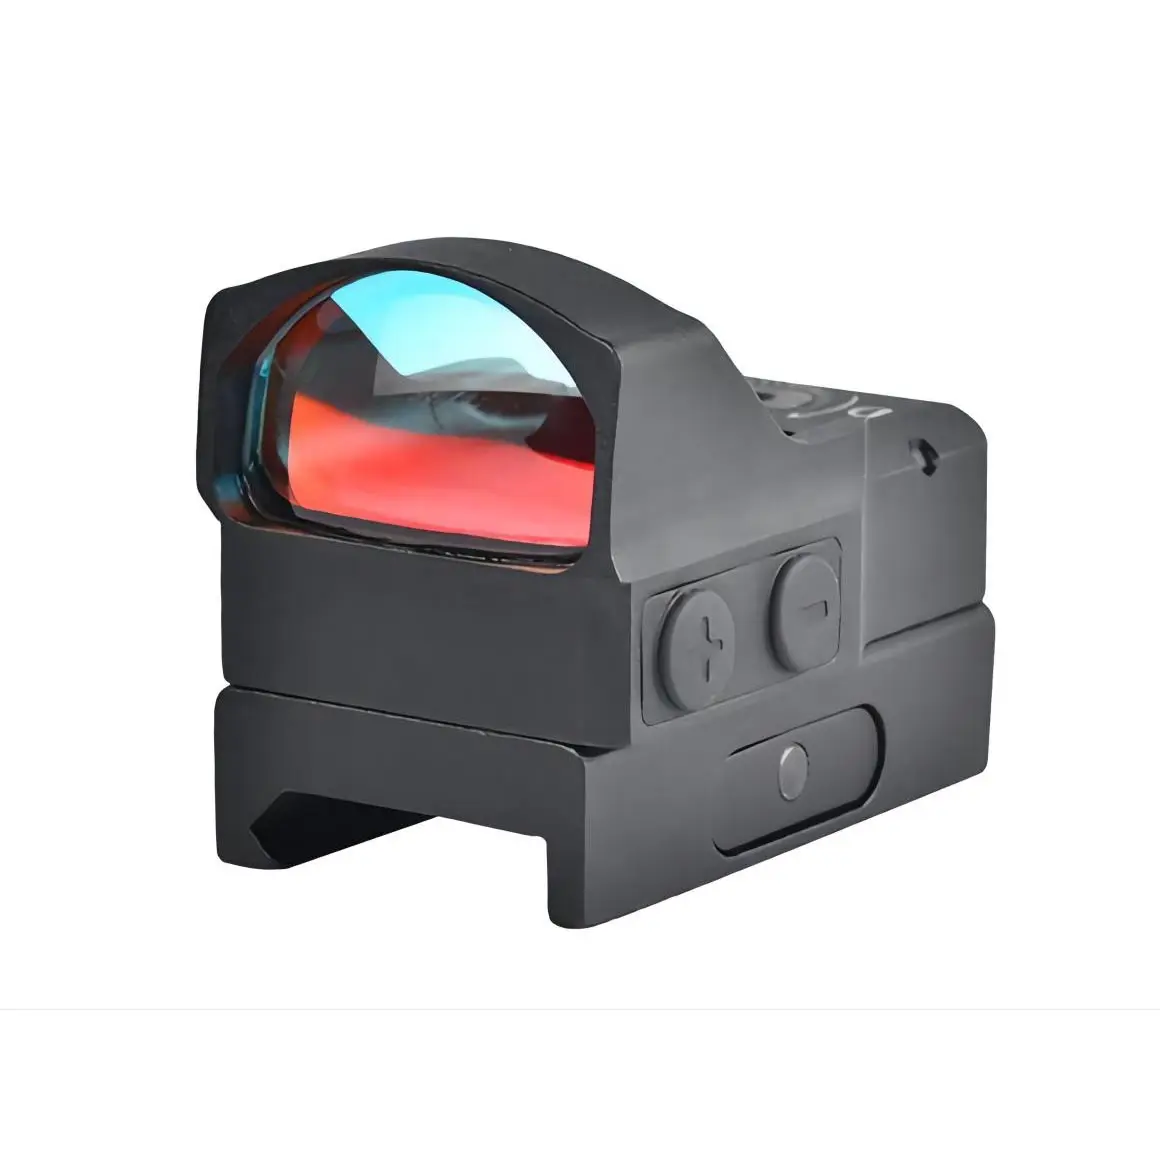 Low Power Consumption 3.5 MOA Reticle Reflex Tactical Red Dot Sight Scope